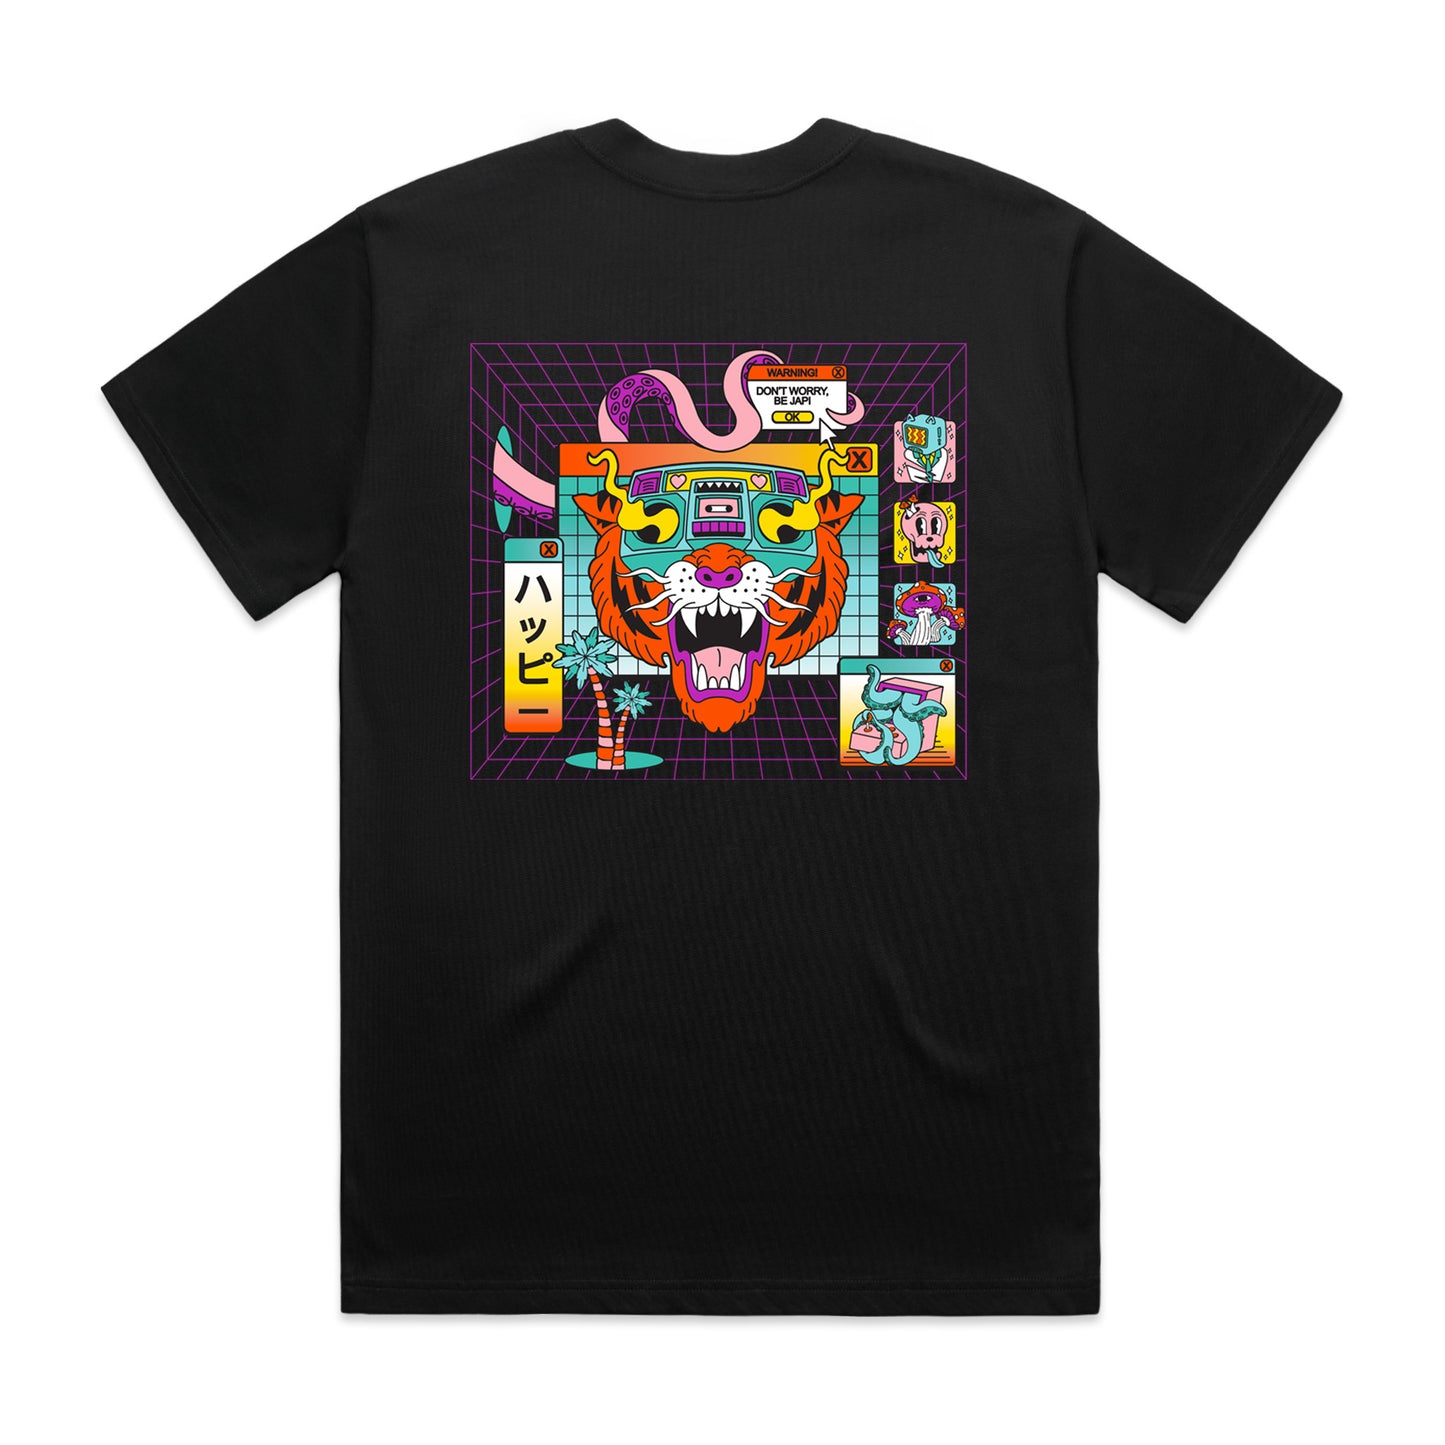 Retrowave Over Size T-Shirt